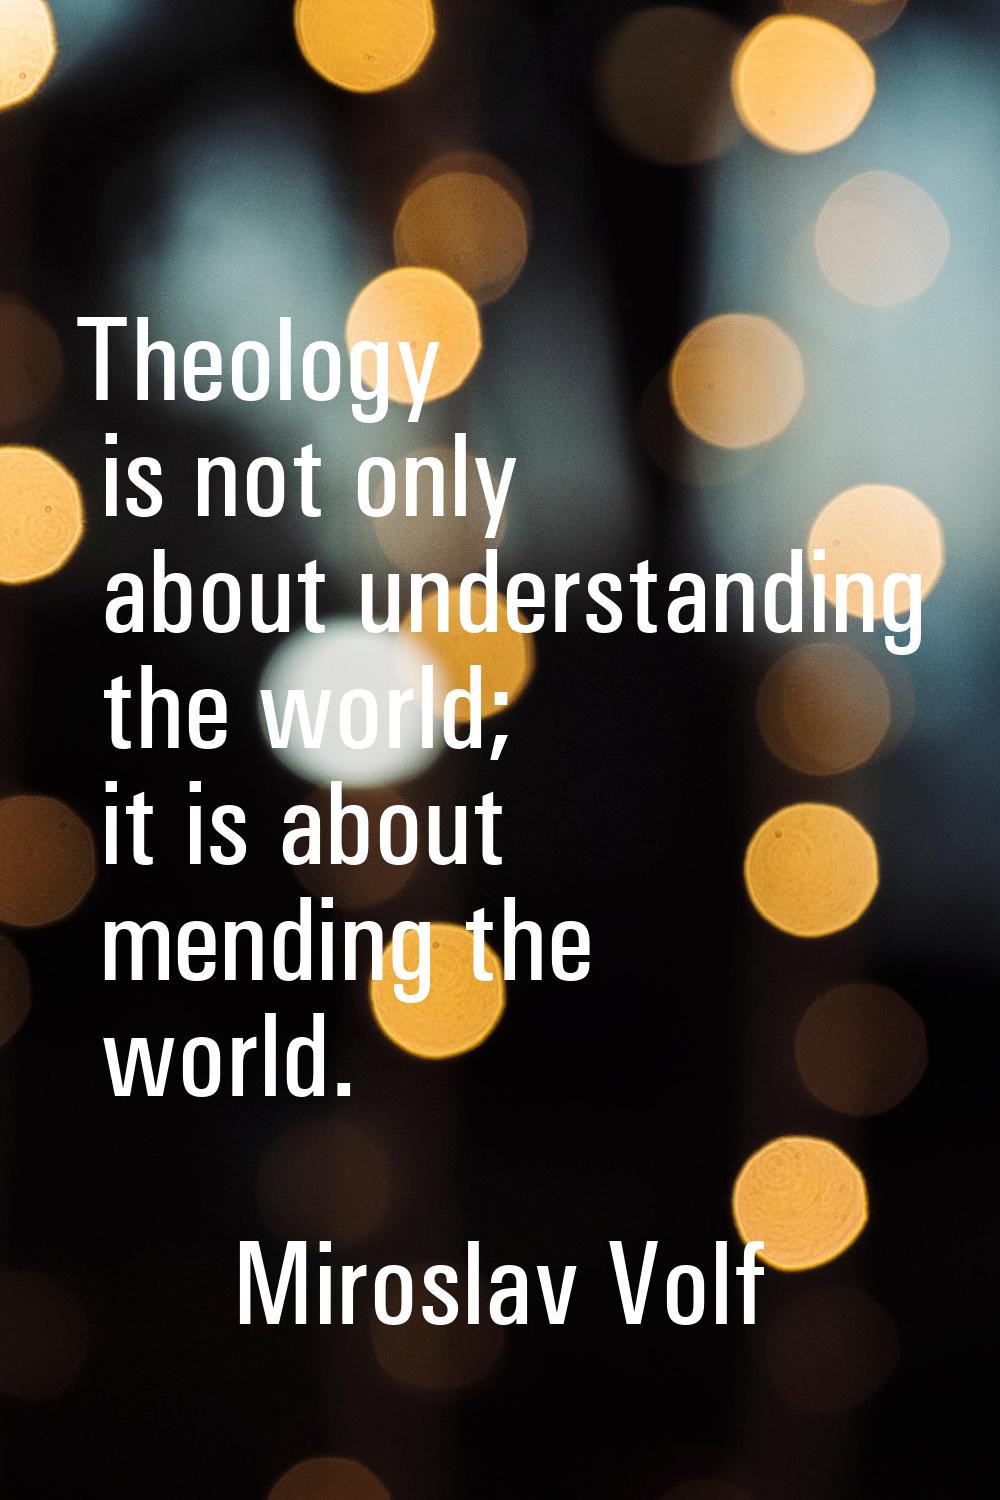 Theology is not only about understanding the world; it is about mending the world.